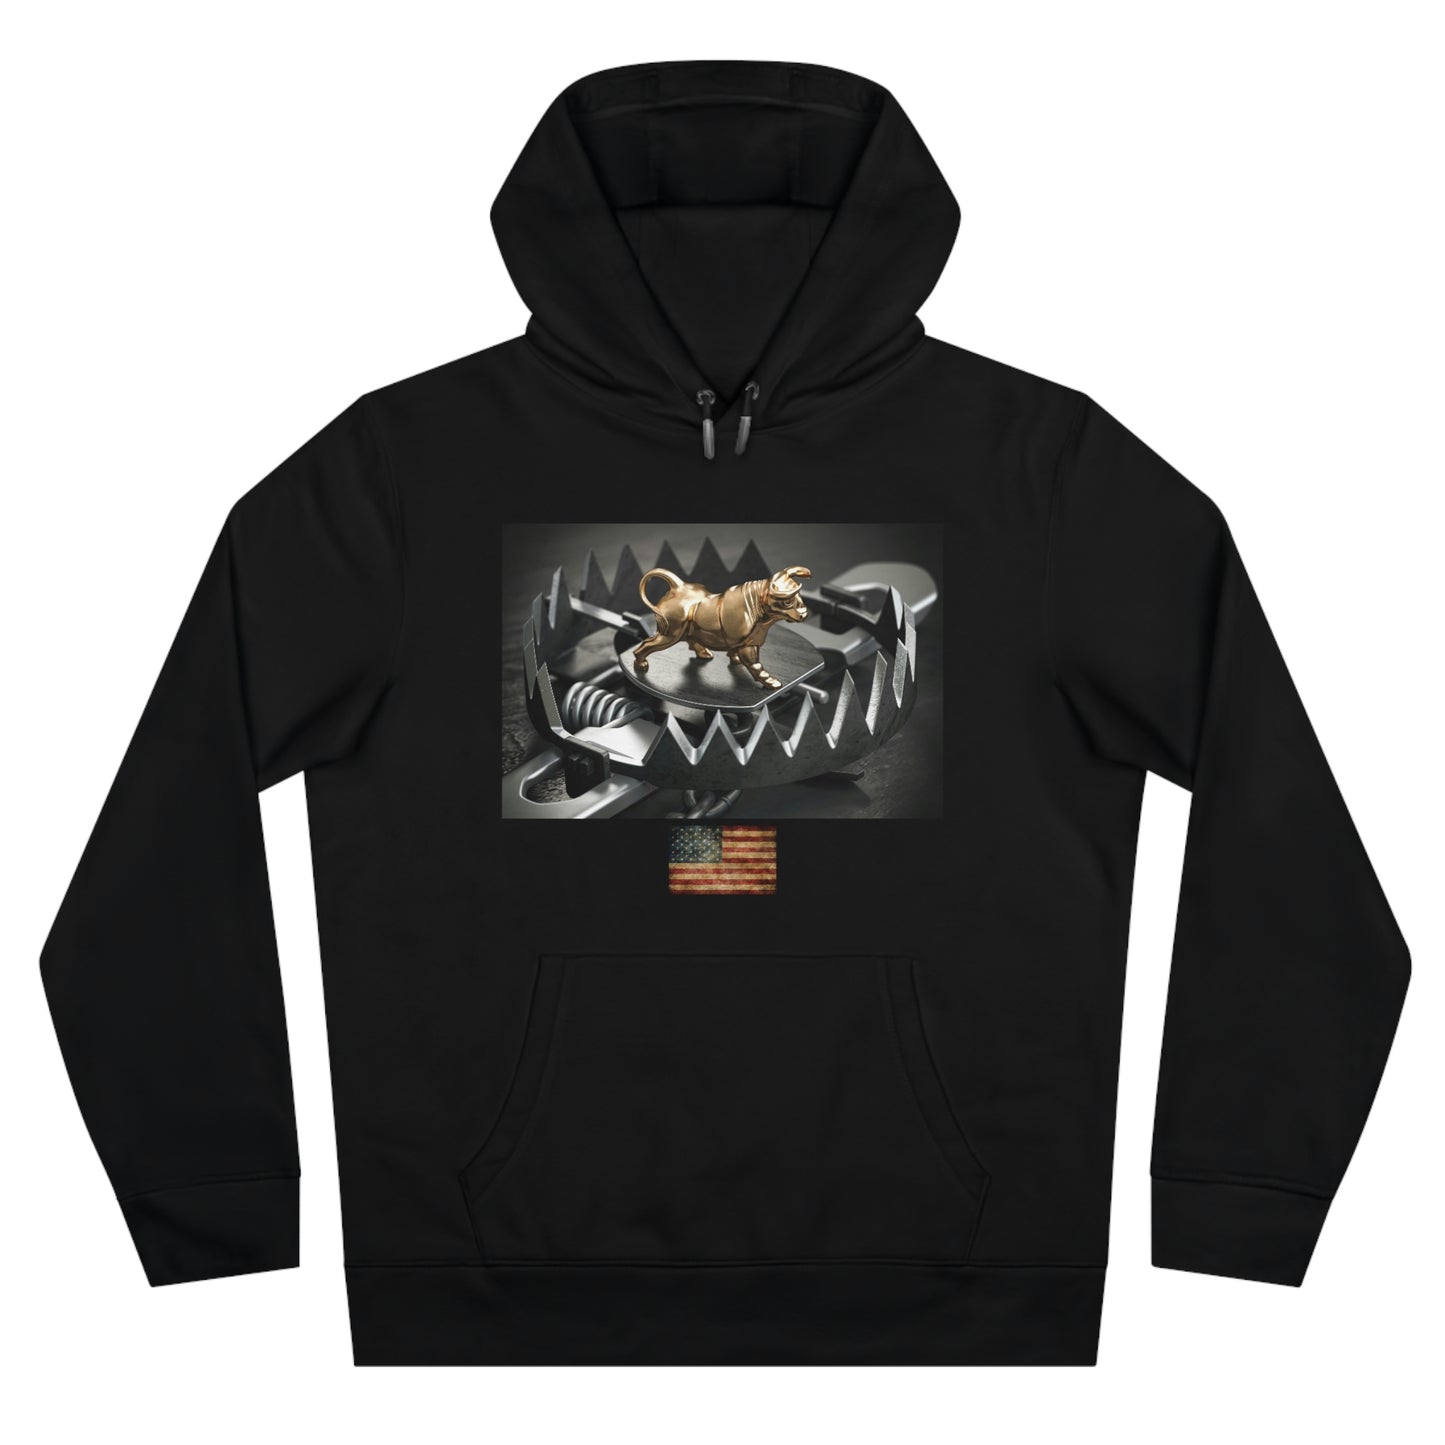 Stay Warm and Fashionable with Our Stock Market Bull Trap Fleece Comfy Hooded Sweatshirt - Perfect for the Savvy Investor!